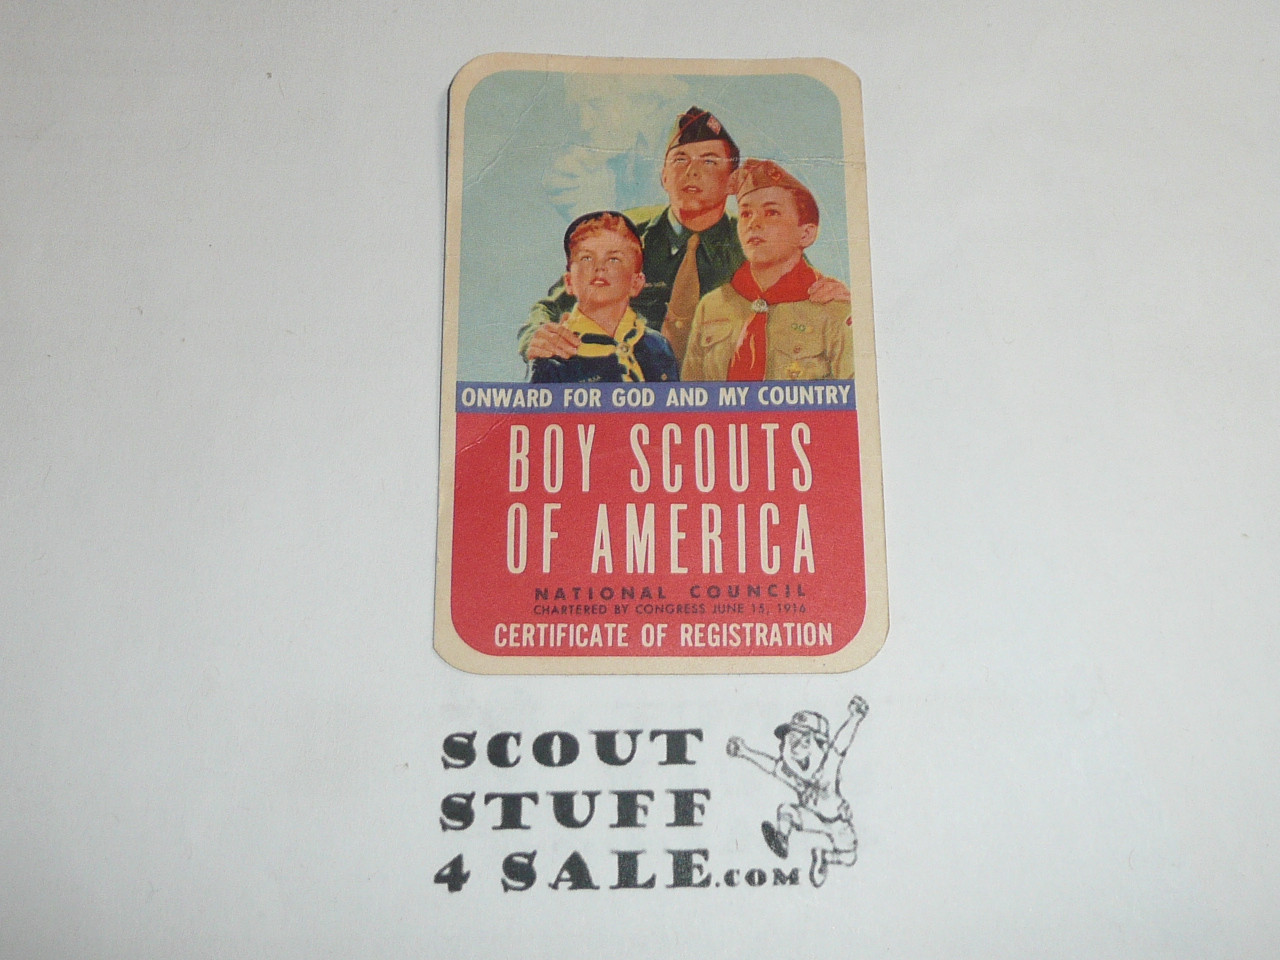 1958 Explorer Scout Membership Card, 2 signatures, buyer to receive a card expiring ranging from 1958 of this style, BSMC93